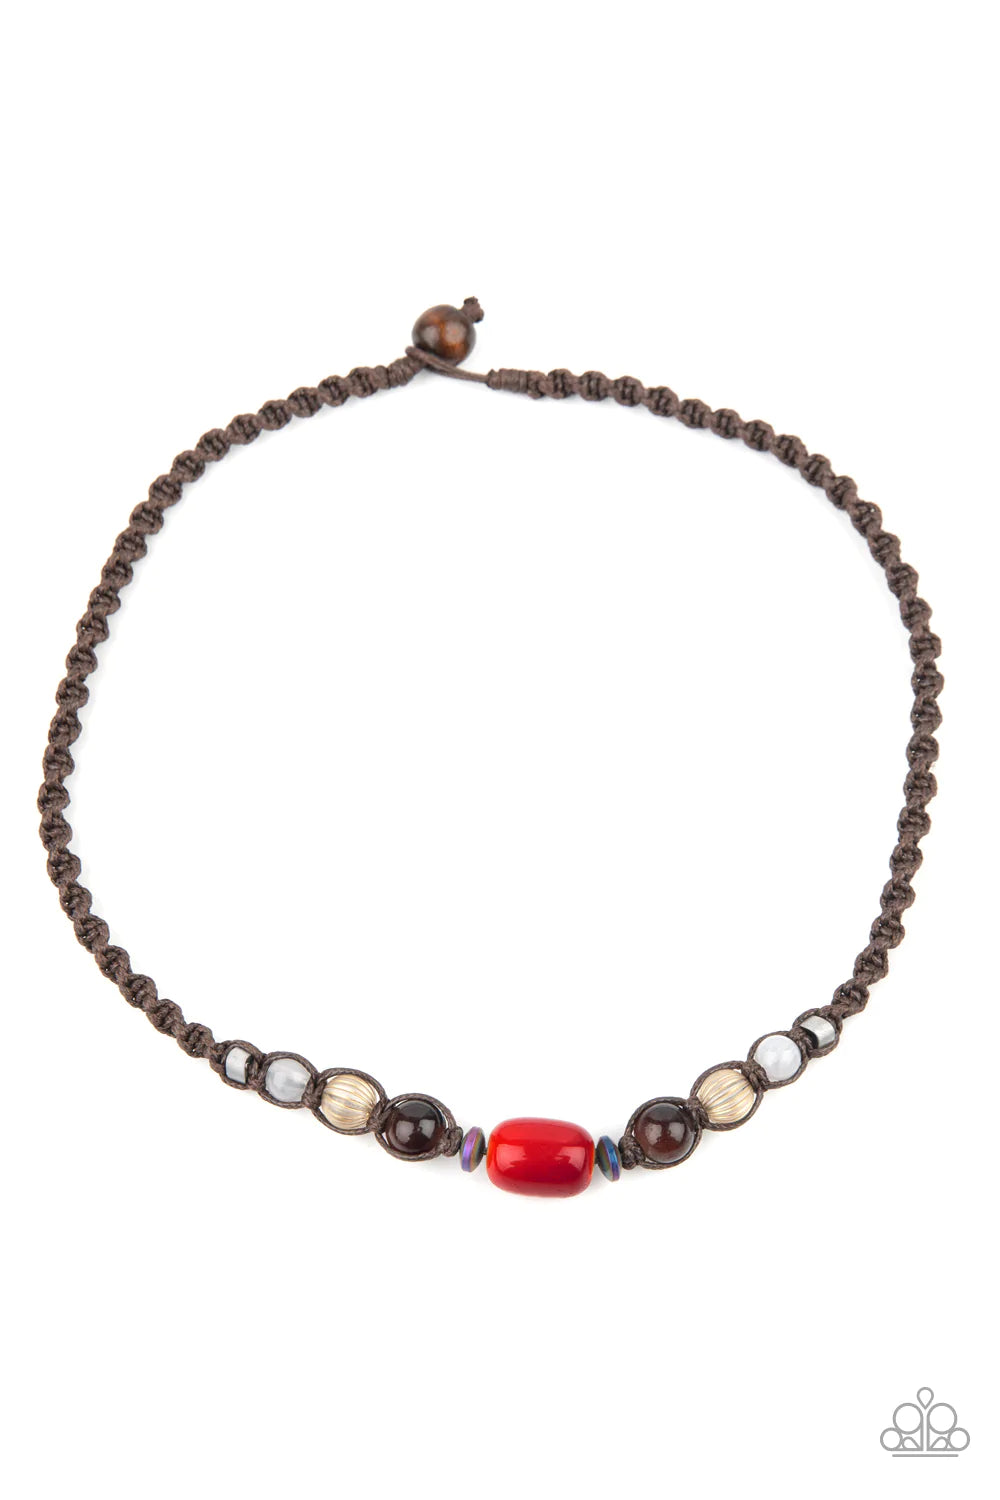 Put up a Beachfront Red Paparazzi Urban Necklace